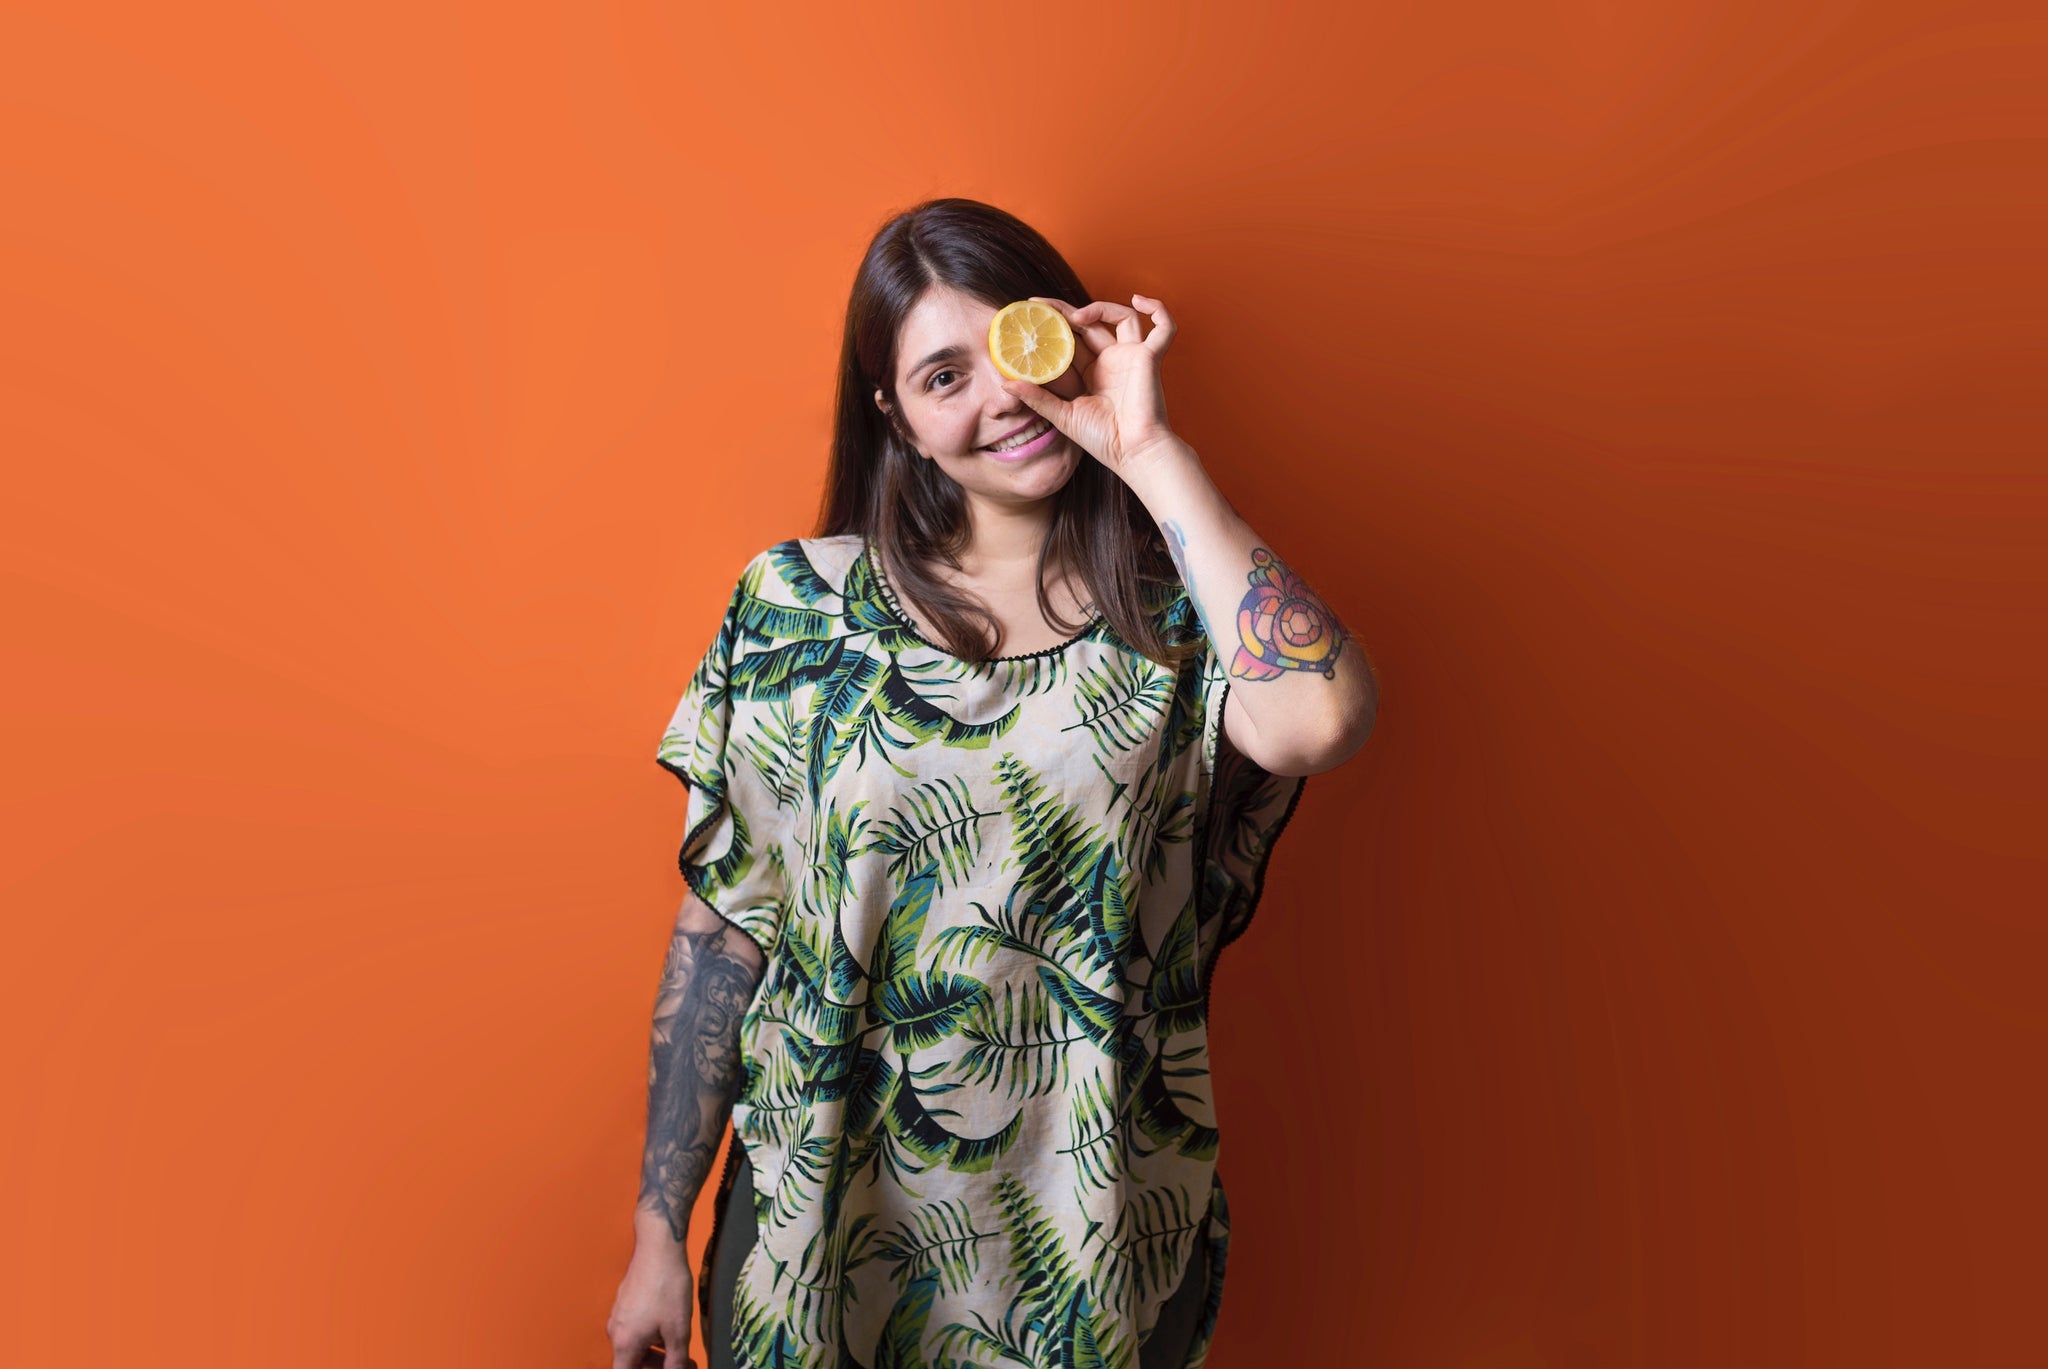 woman holding citrus over one eye